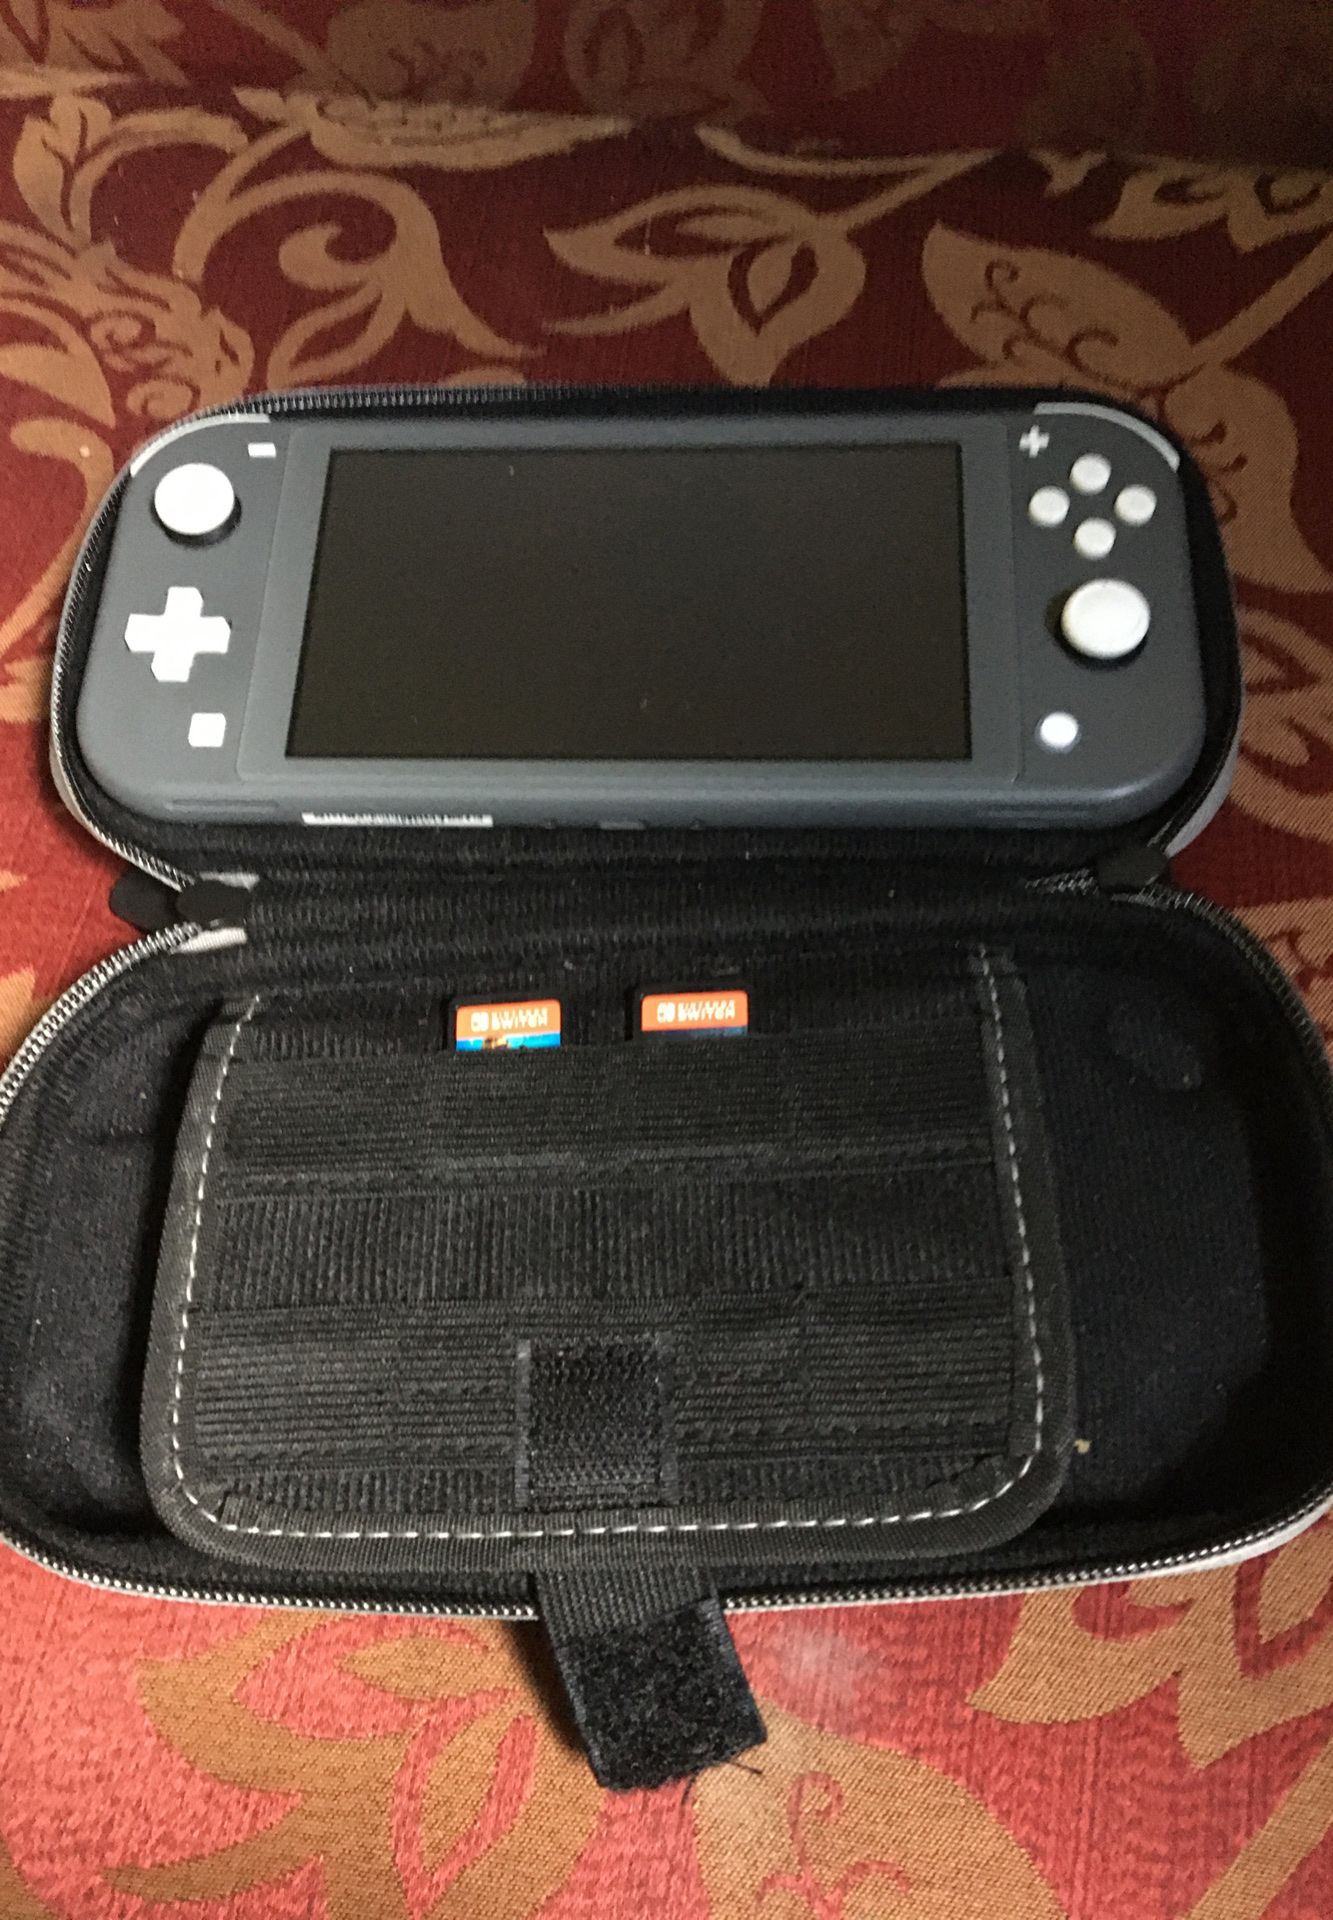 Nintendo switch lite..lookin to trade electronics or collectible action figures